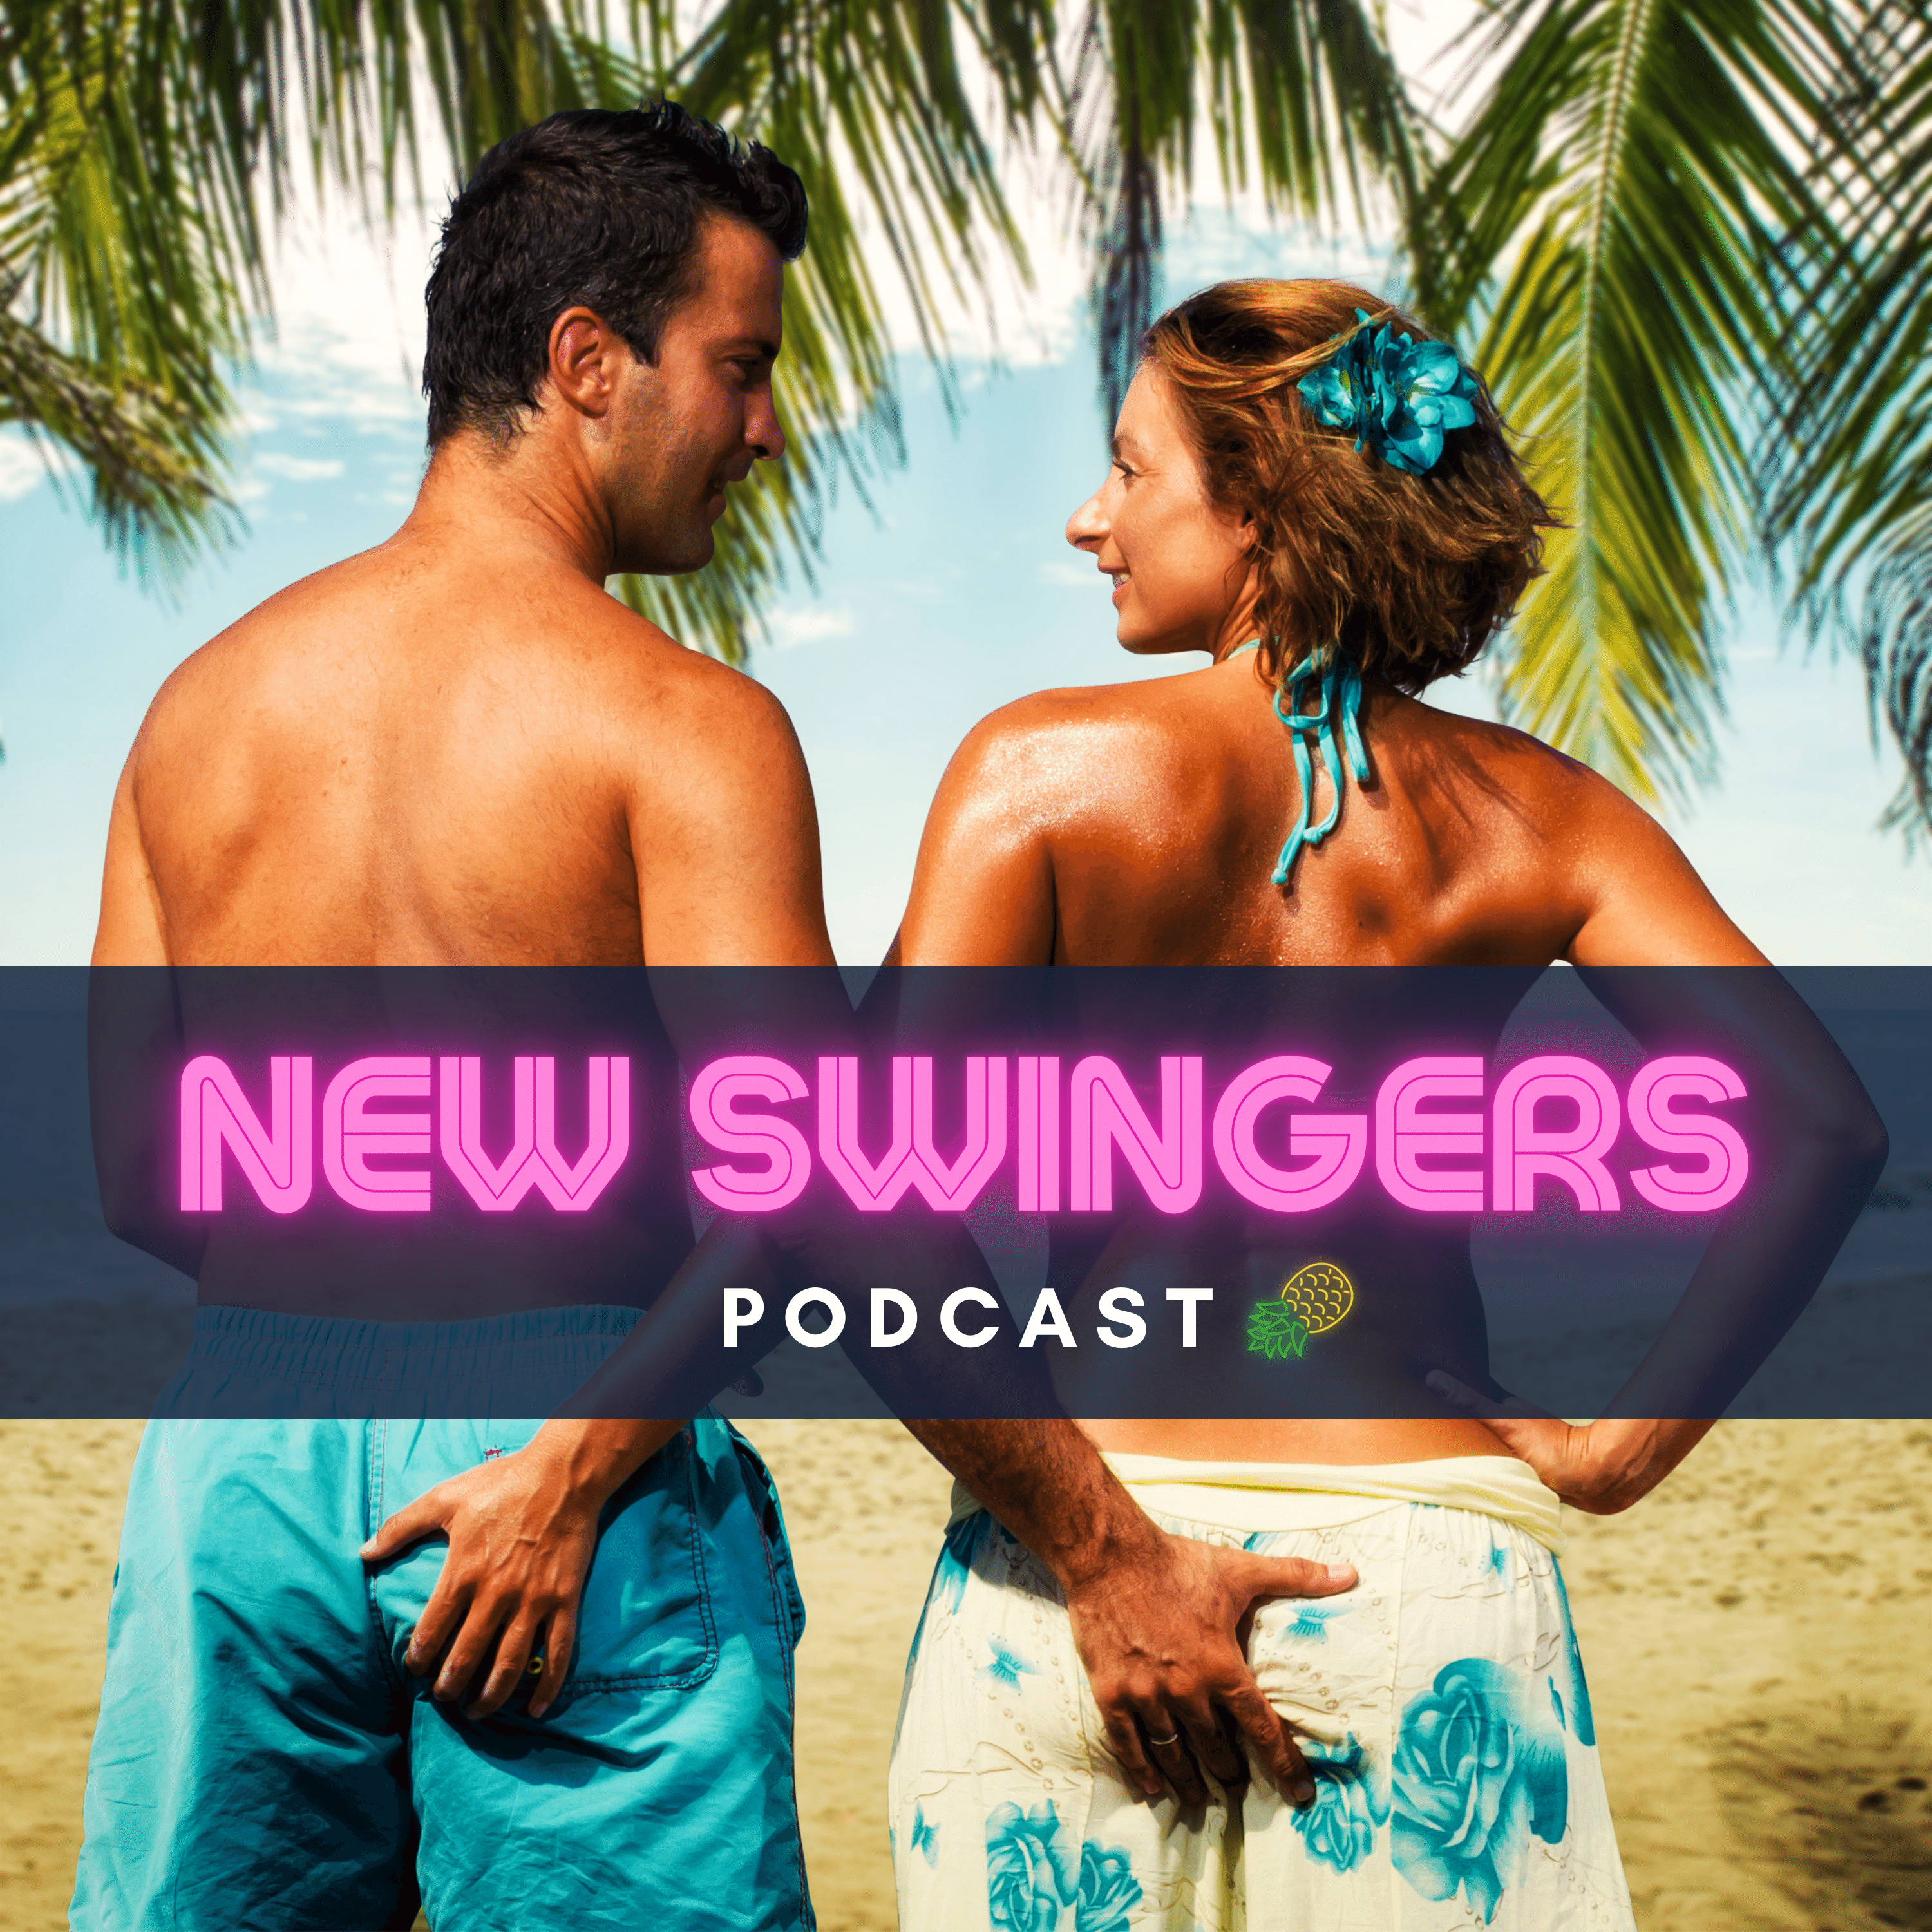 New Swingers Podcast- Practical Advice For New Swinger Couples